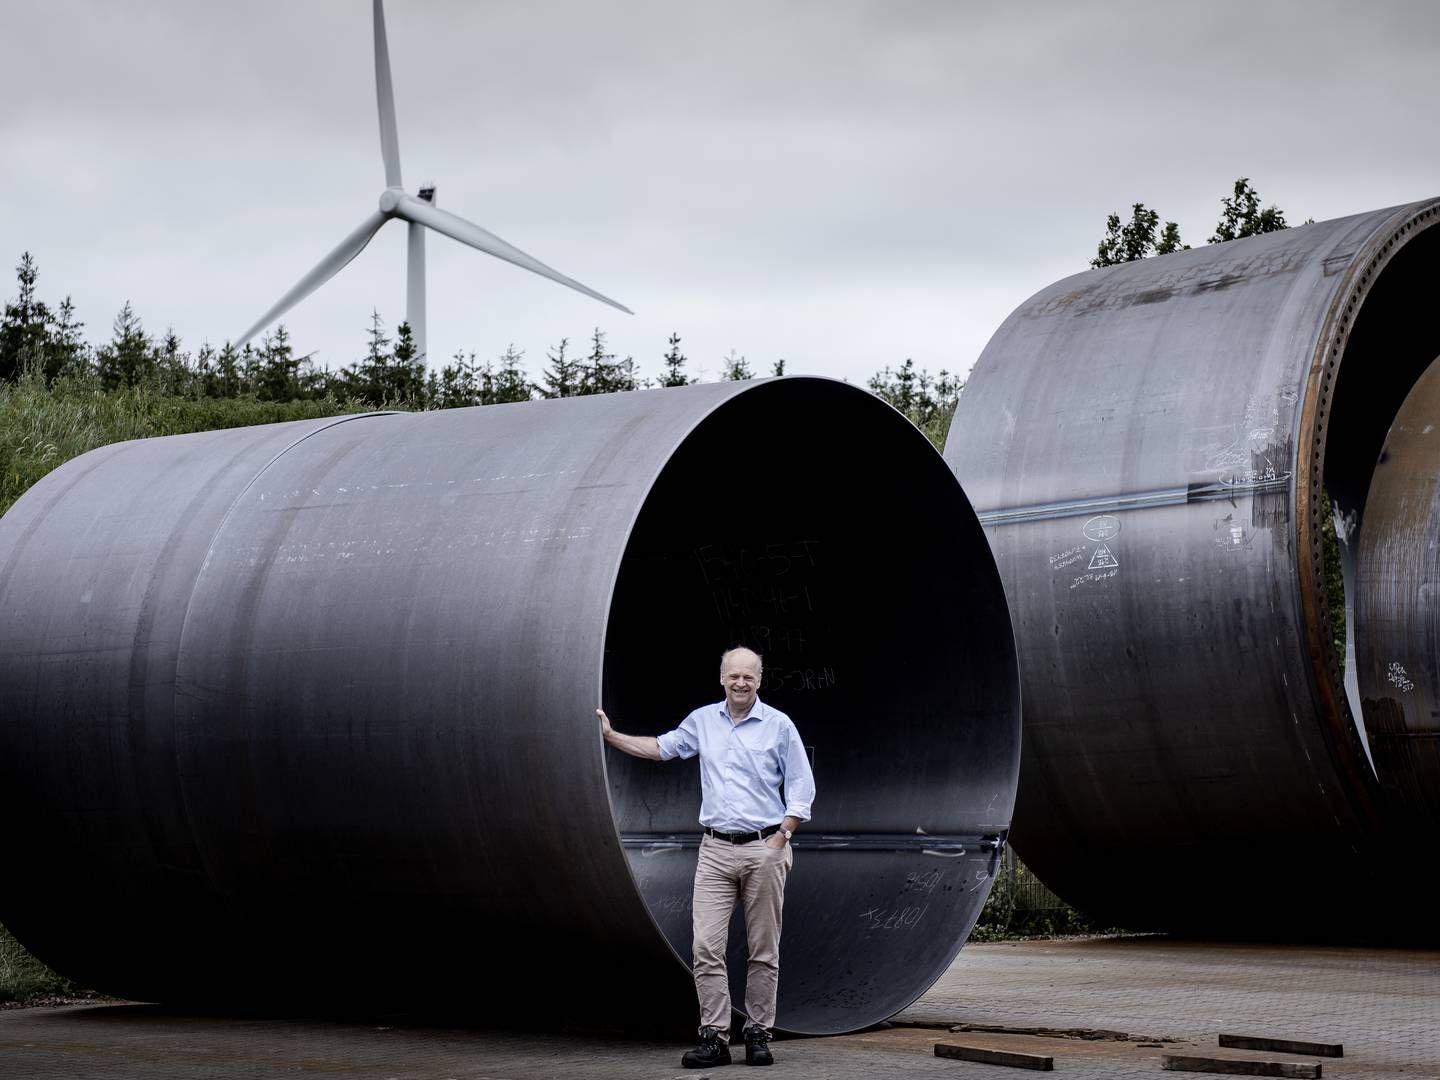 Henrik Stiesdal has had a long career in renewables, having worked for both Vestas and Siemens Wind Power before founding his company, Stiesdal A/S with four subsidiaries with distinct profiles within green technology. | Photo: Casper Dalhoff/ERH